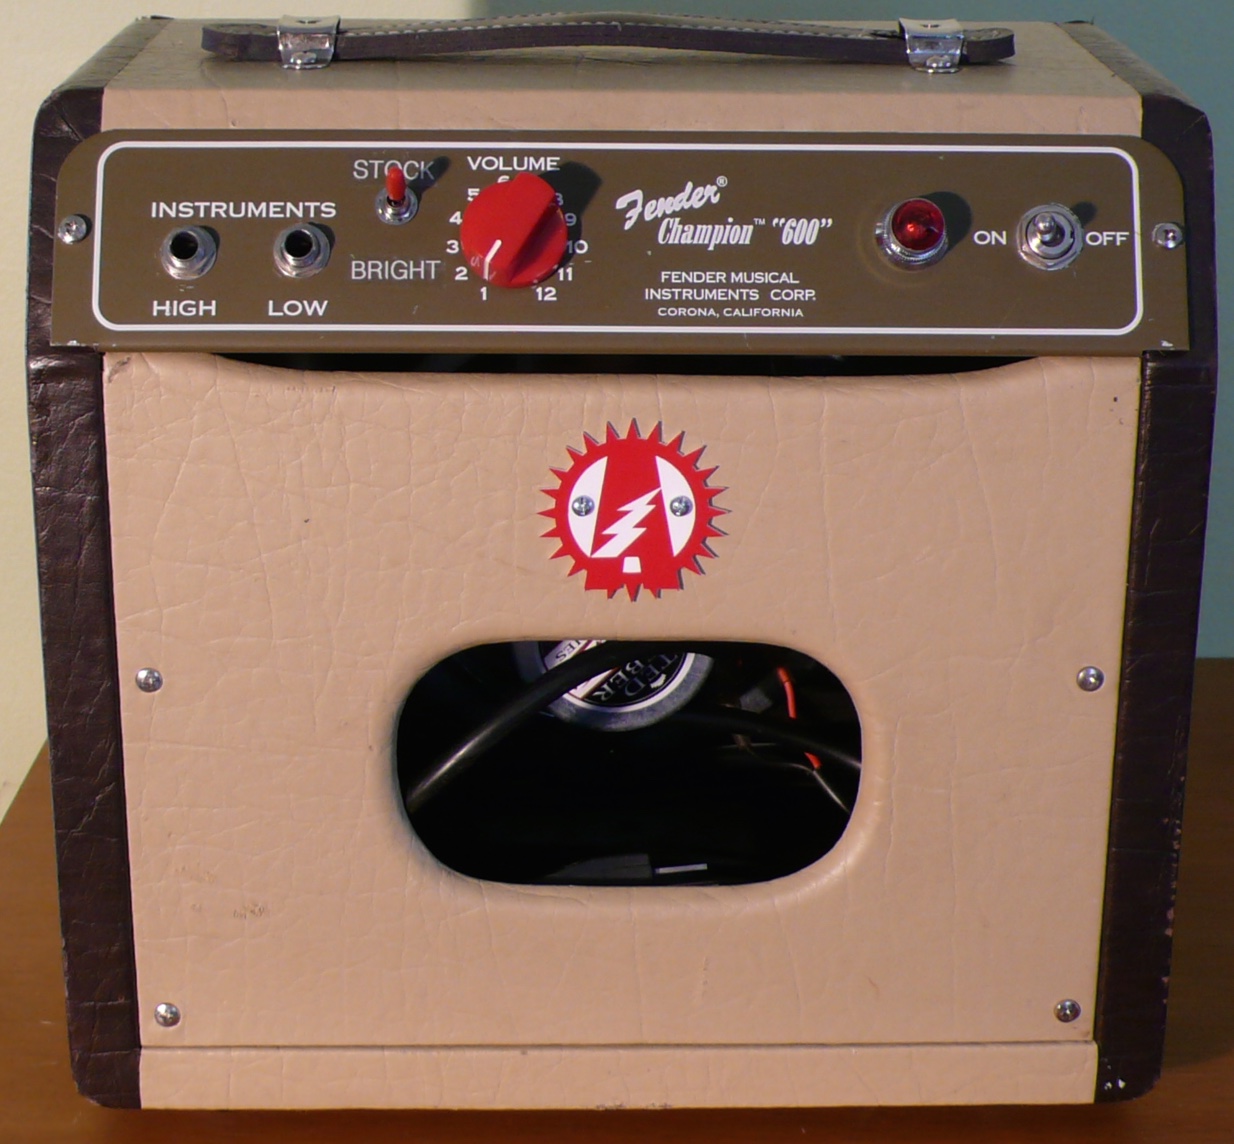 Modify your Fender Champion 600 amplifier with upgrades! Mod service Only!